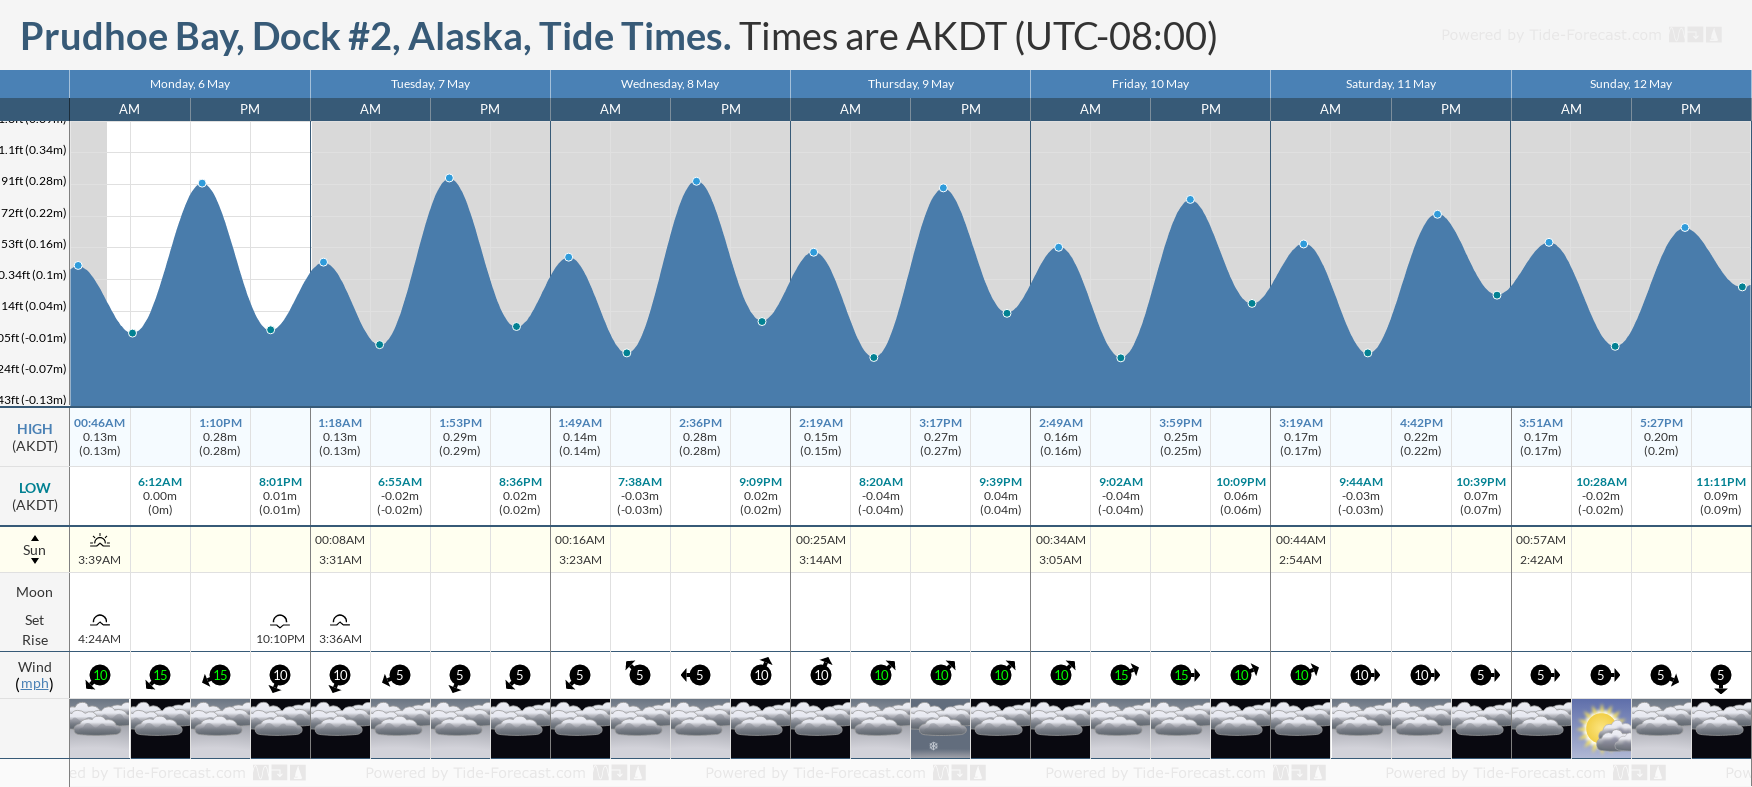 Prudhoe Bay, Dock #2, Alaska Tide Chart including high and low tide tide times for the next 7 days